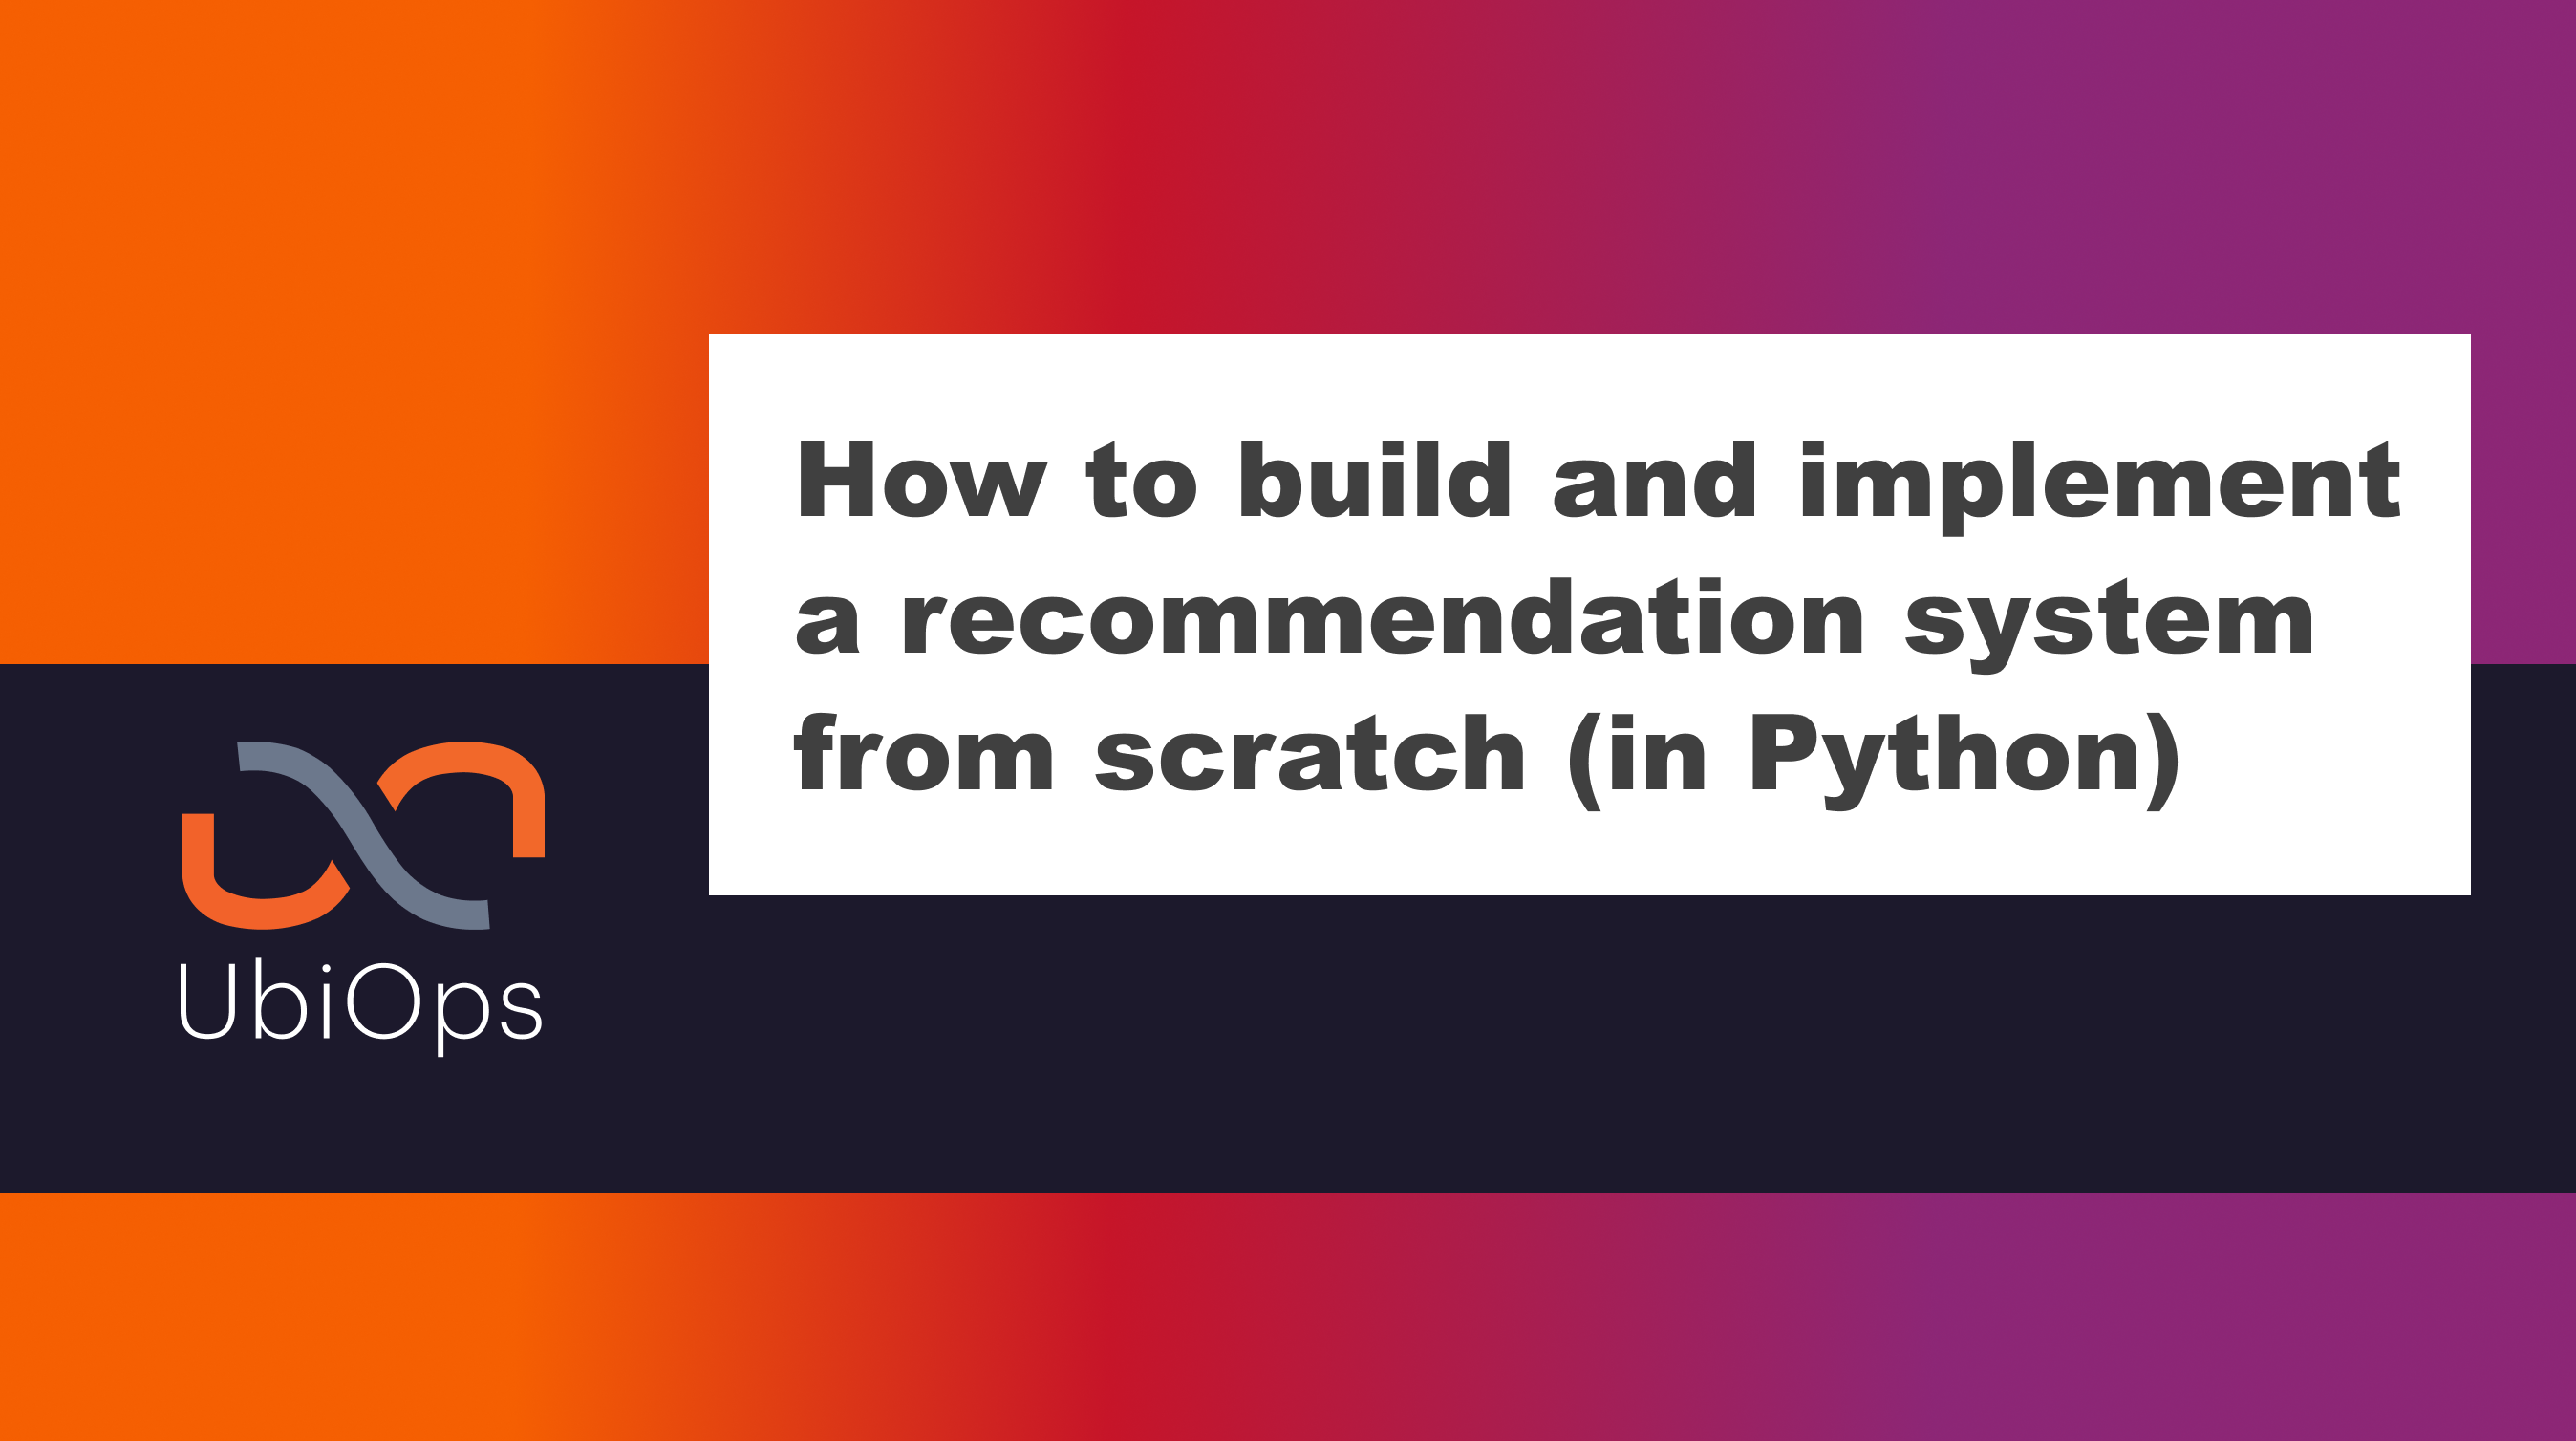 How to build and implement a recommendation system from scratch (in Python)